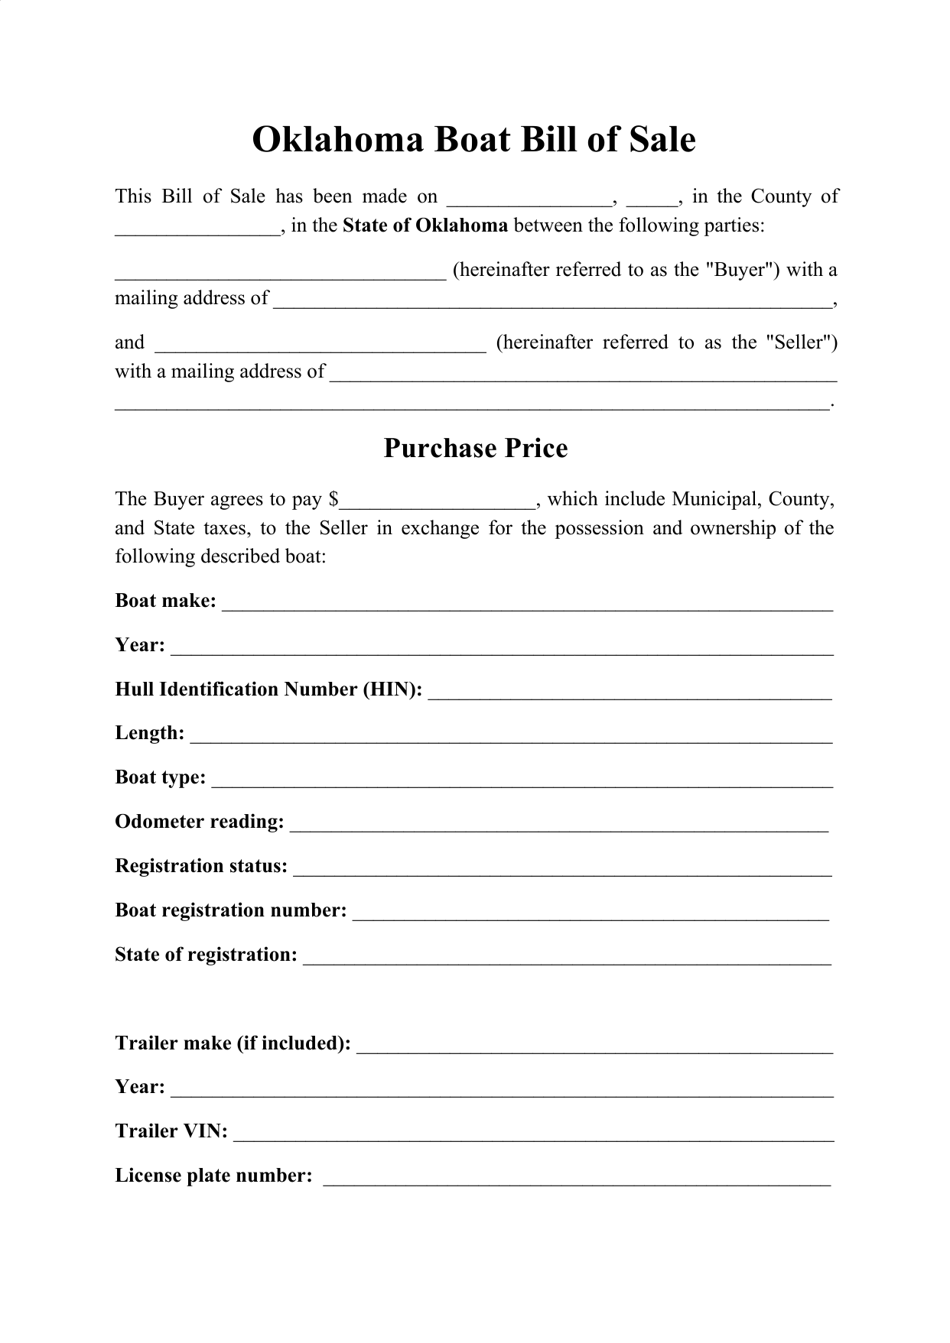 oklahoma-boat-bill-of-sale-form-fill-out-sign-online-and-download